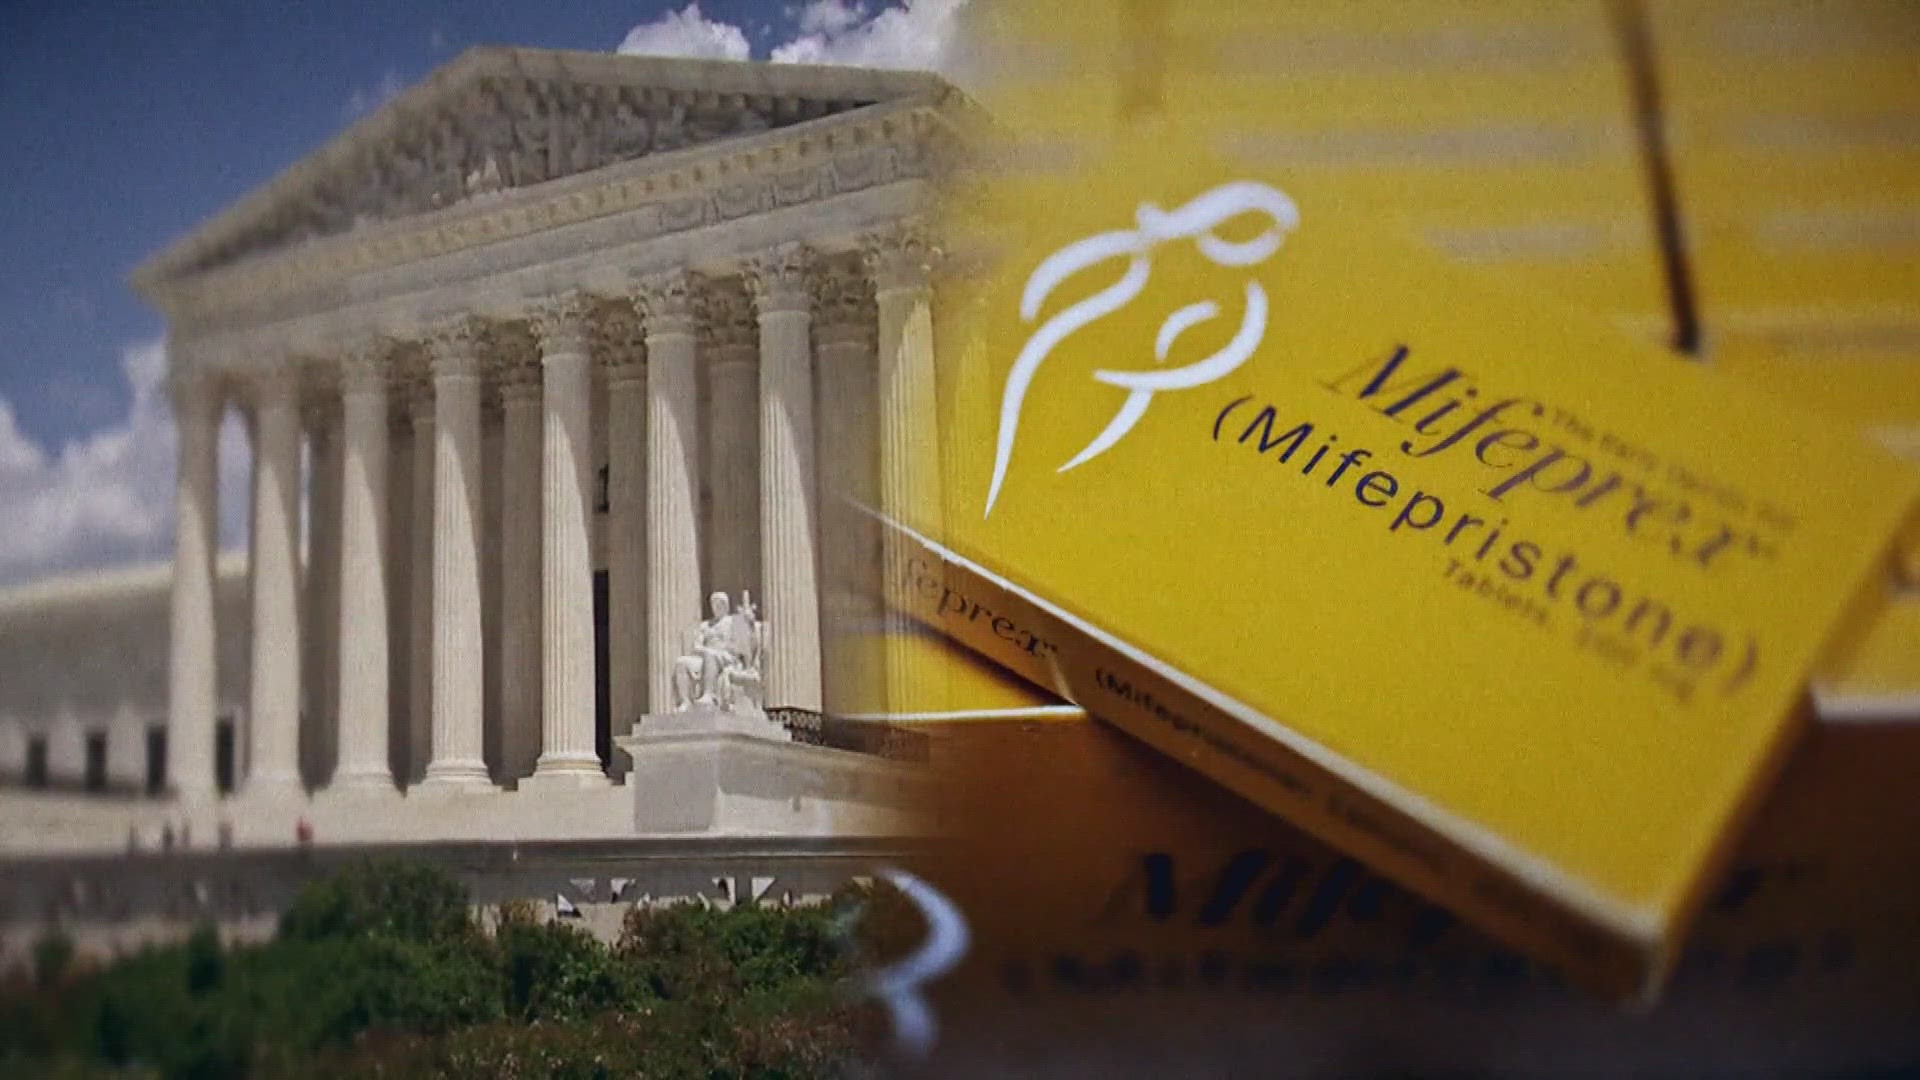 Justices heard oral arguments Tuesday in a case that could limit access to a commonly used abortion pill.